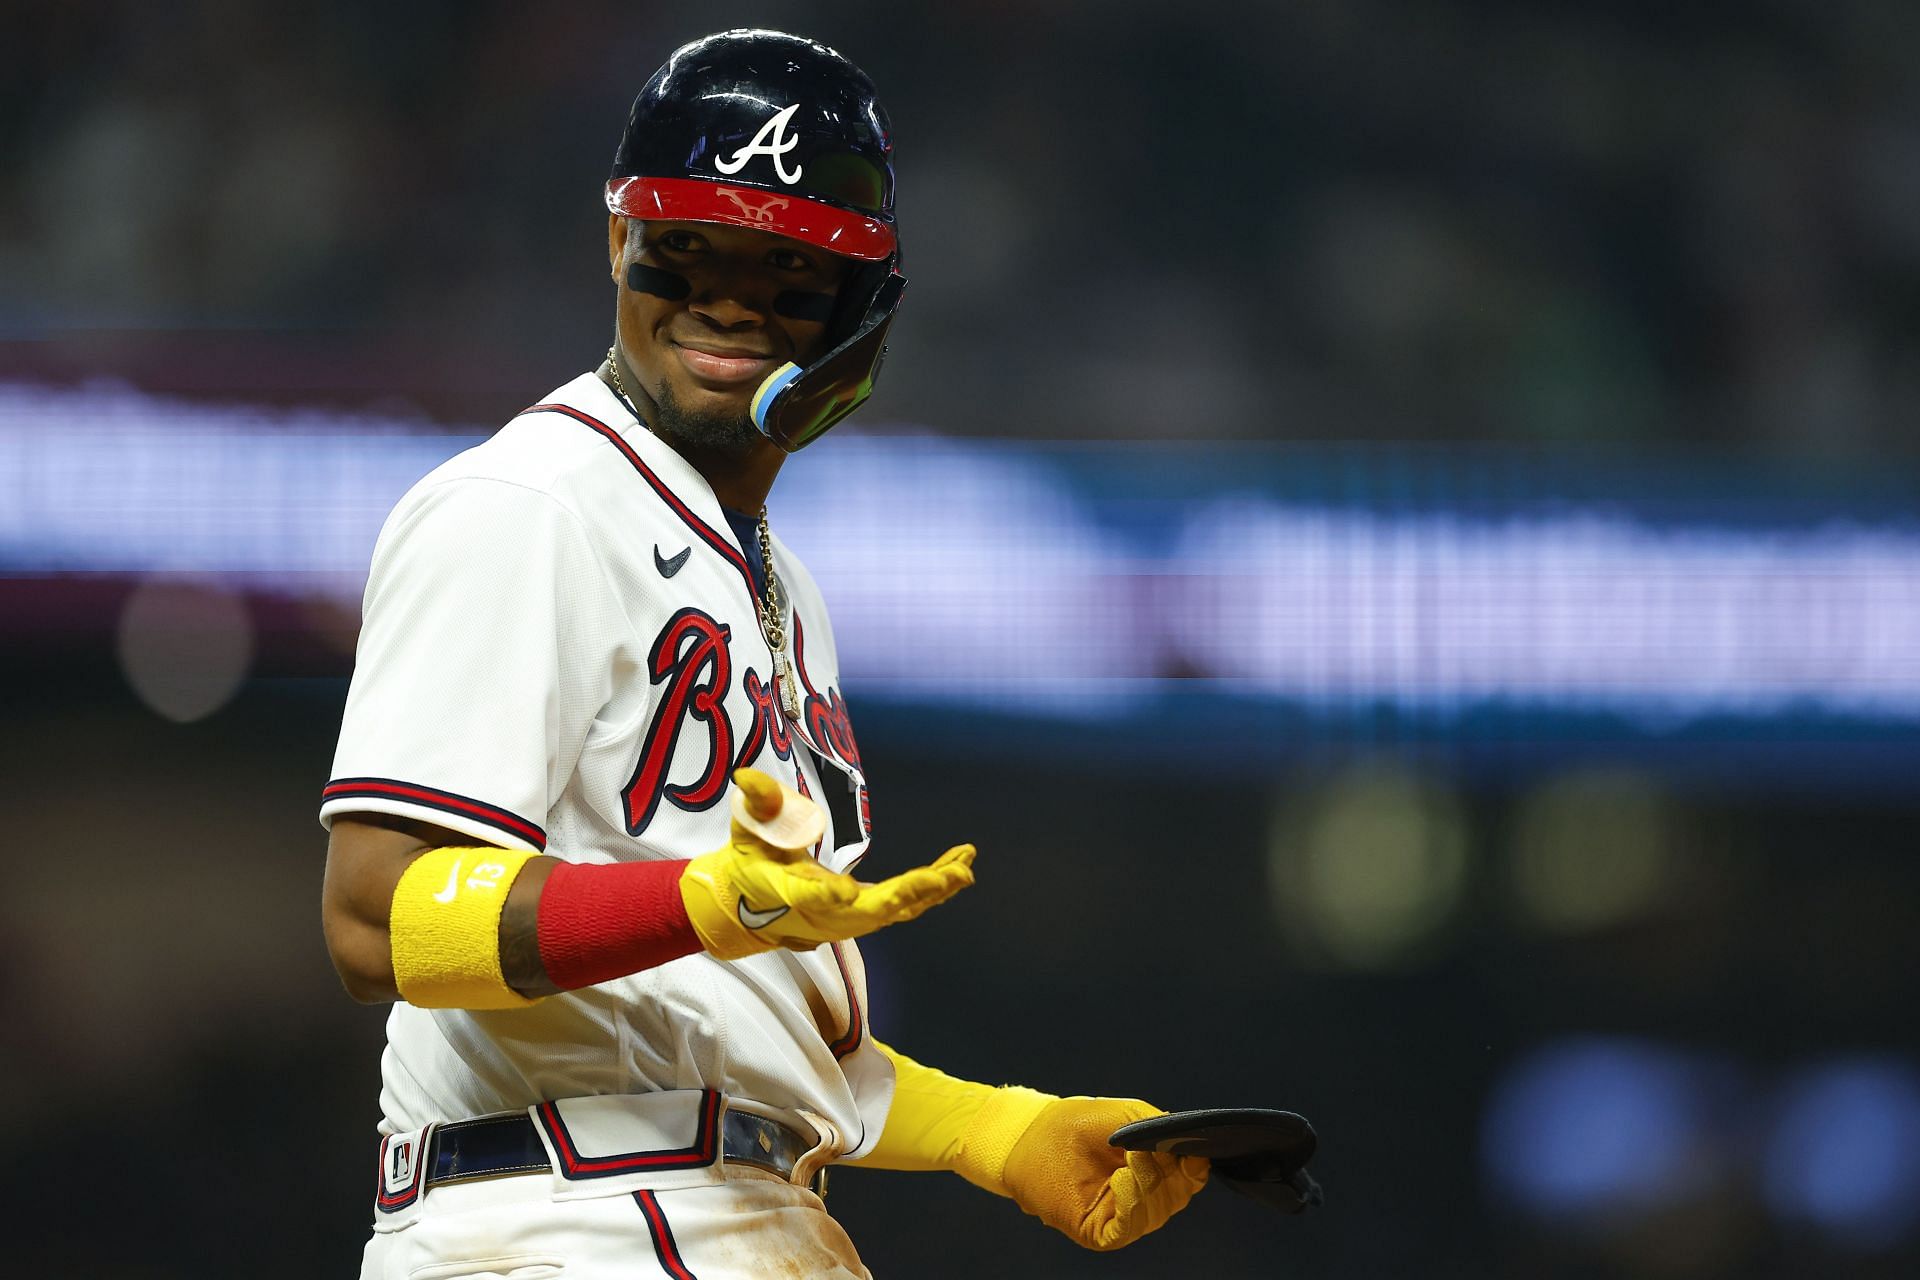 MLB playoffs: Ronald Acuna becomes youngest with postseason grand slam